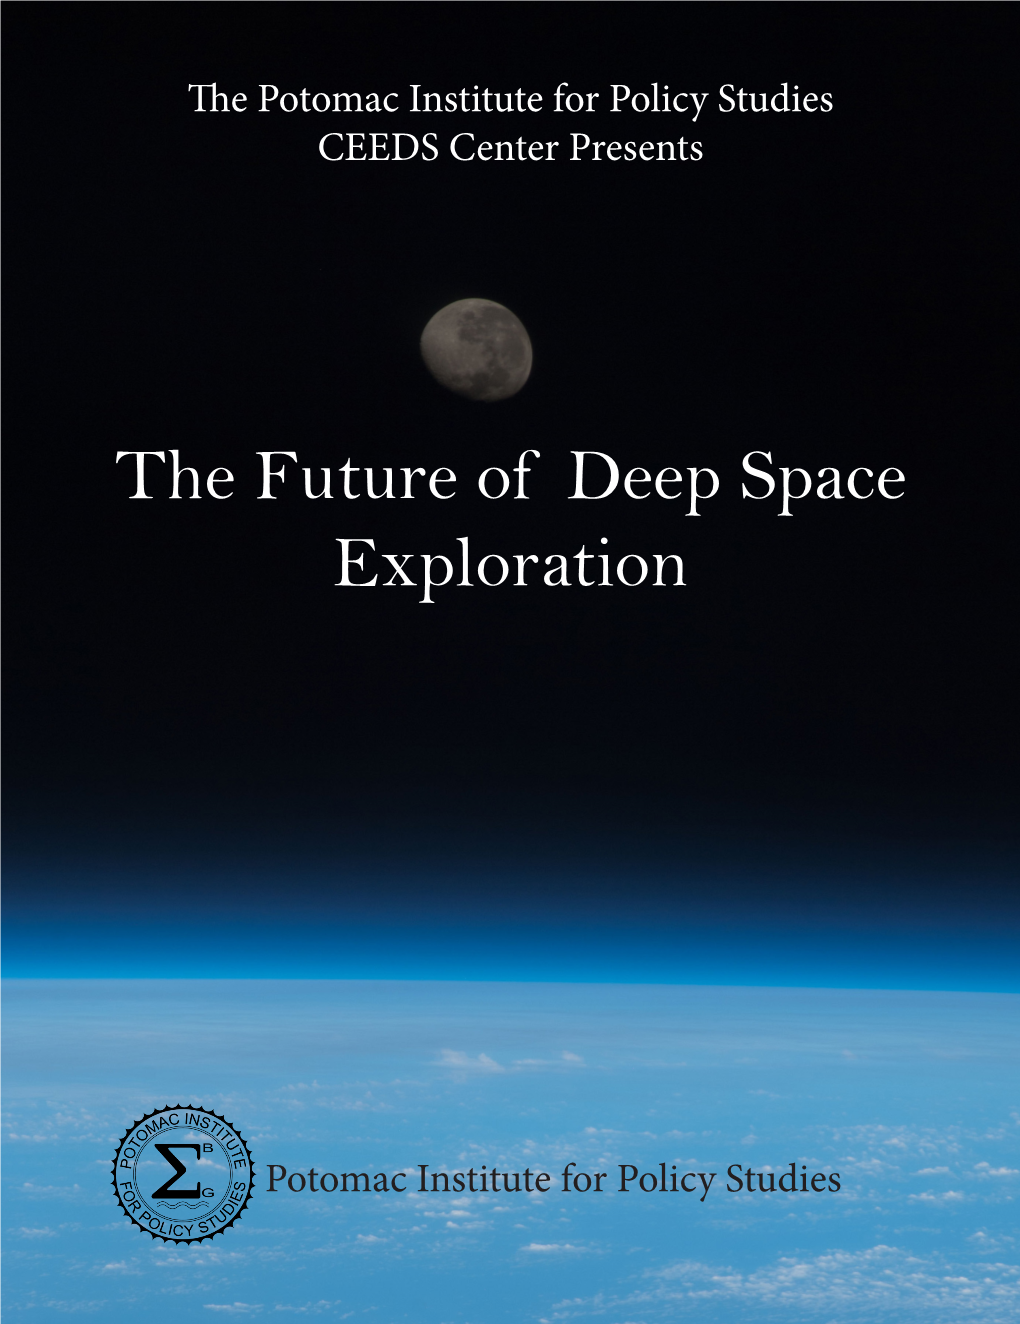 The Future of Deep Space Exploration